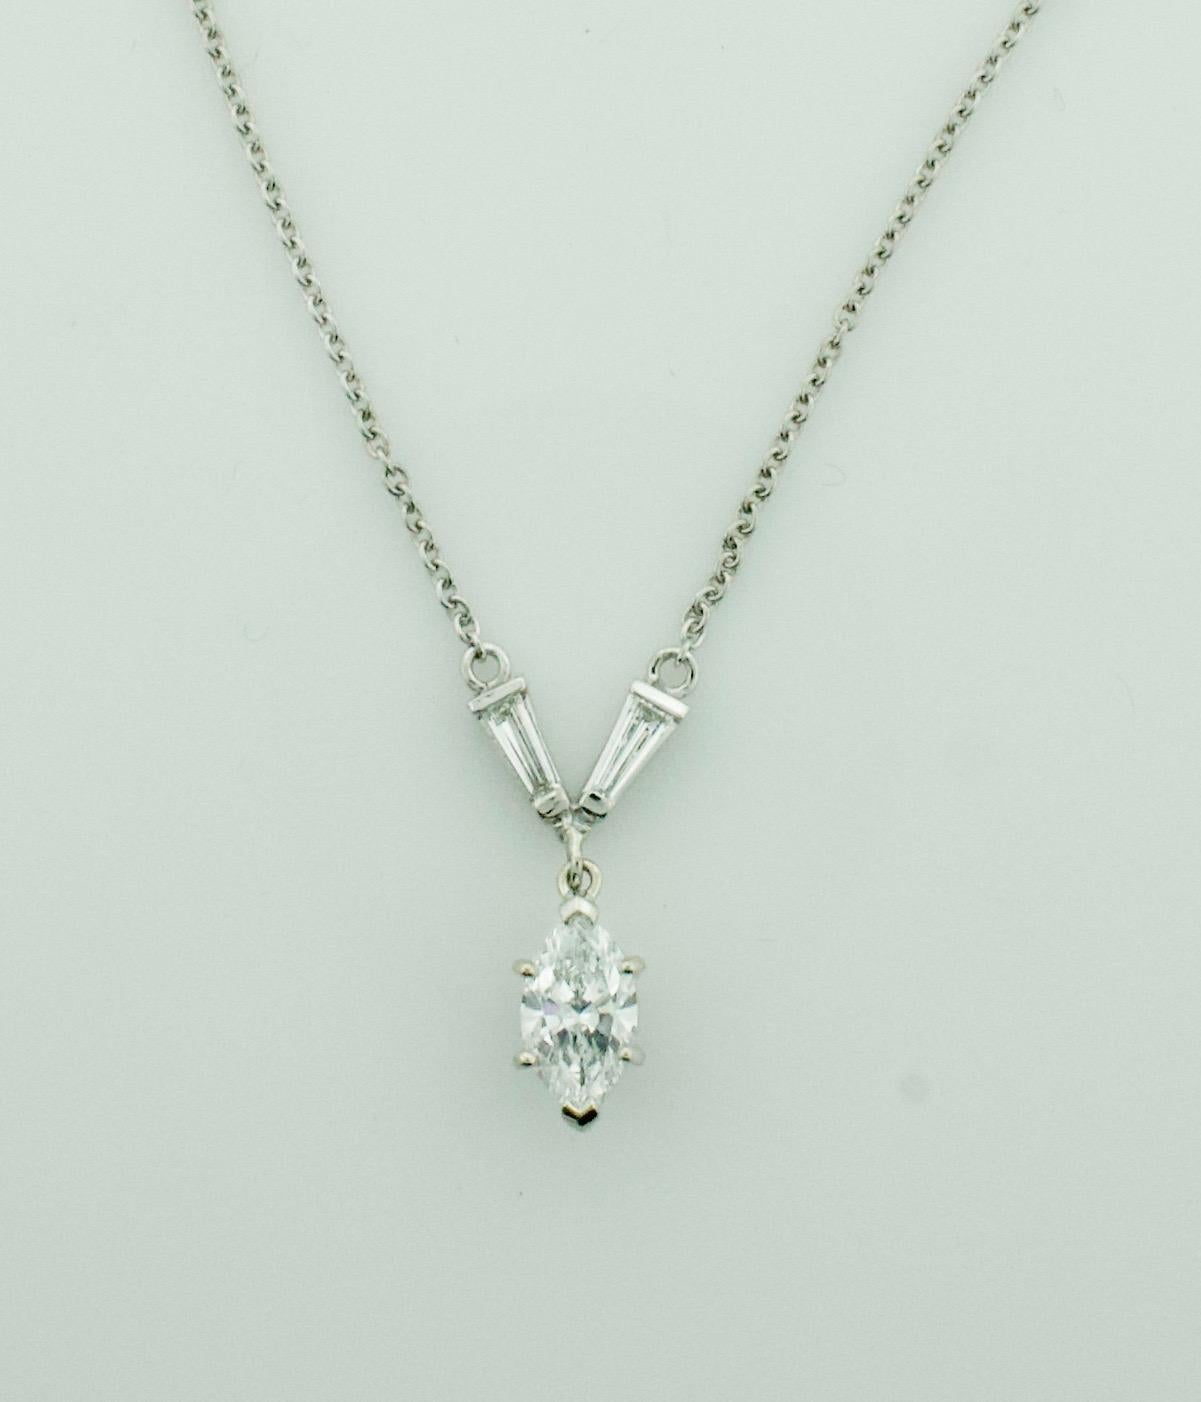 Classic Marquise Diamond Drop Necklace in Platinum GIA E SI1 In Excellent Condition For Sale In Wailea, HI